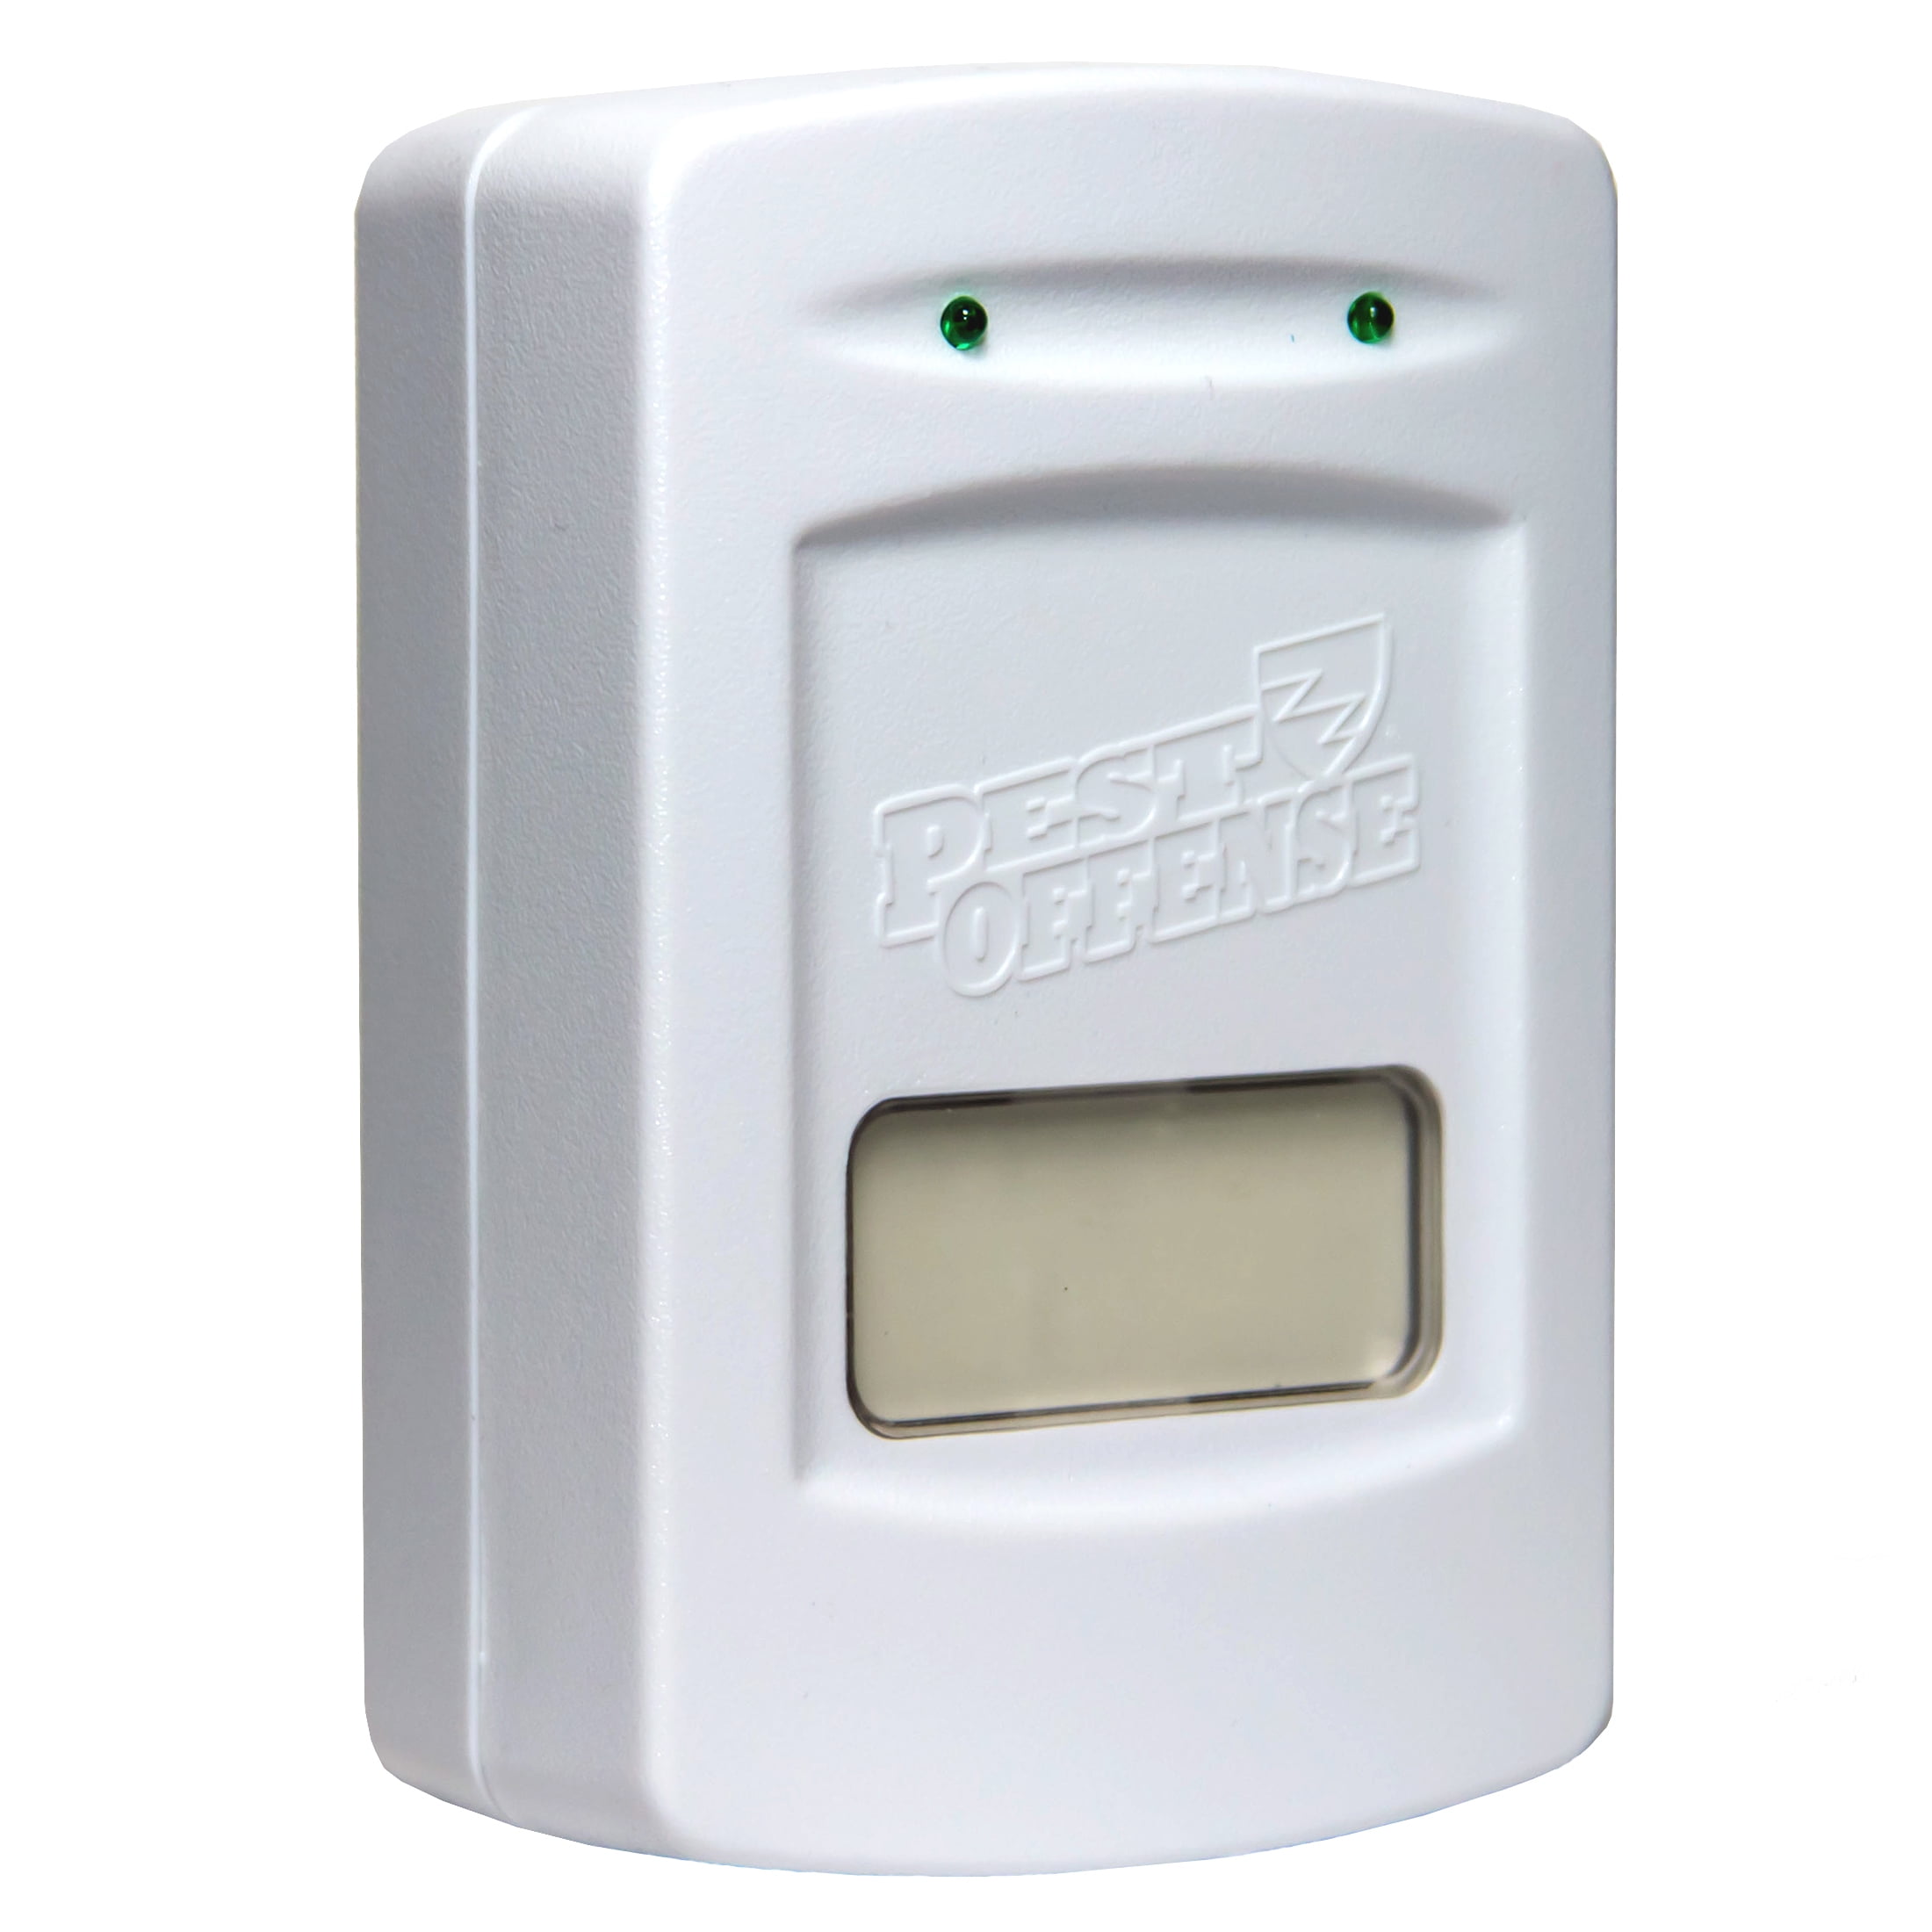 PEST OFFENSE Electronic Pest Repeller, Indoor Pest Control, Effective for Roaches & Mice, 1 per level of the average size home, 1 Ct.